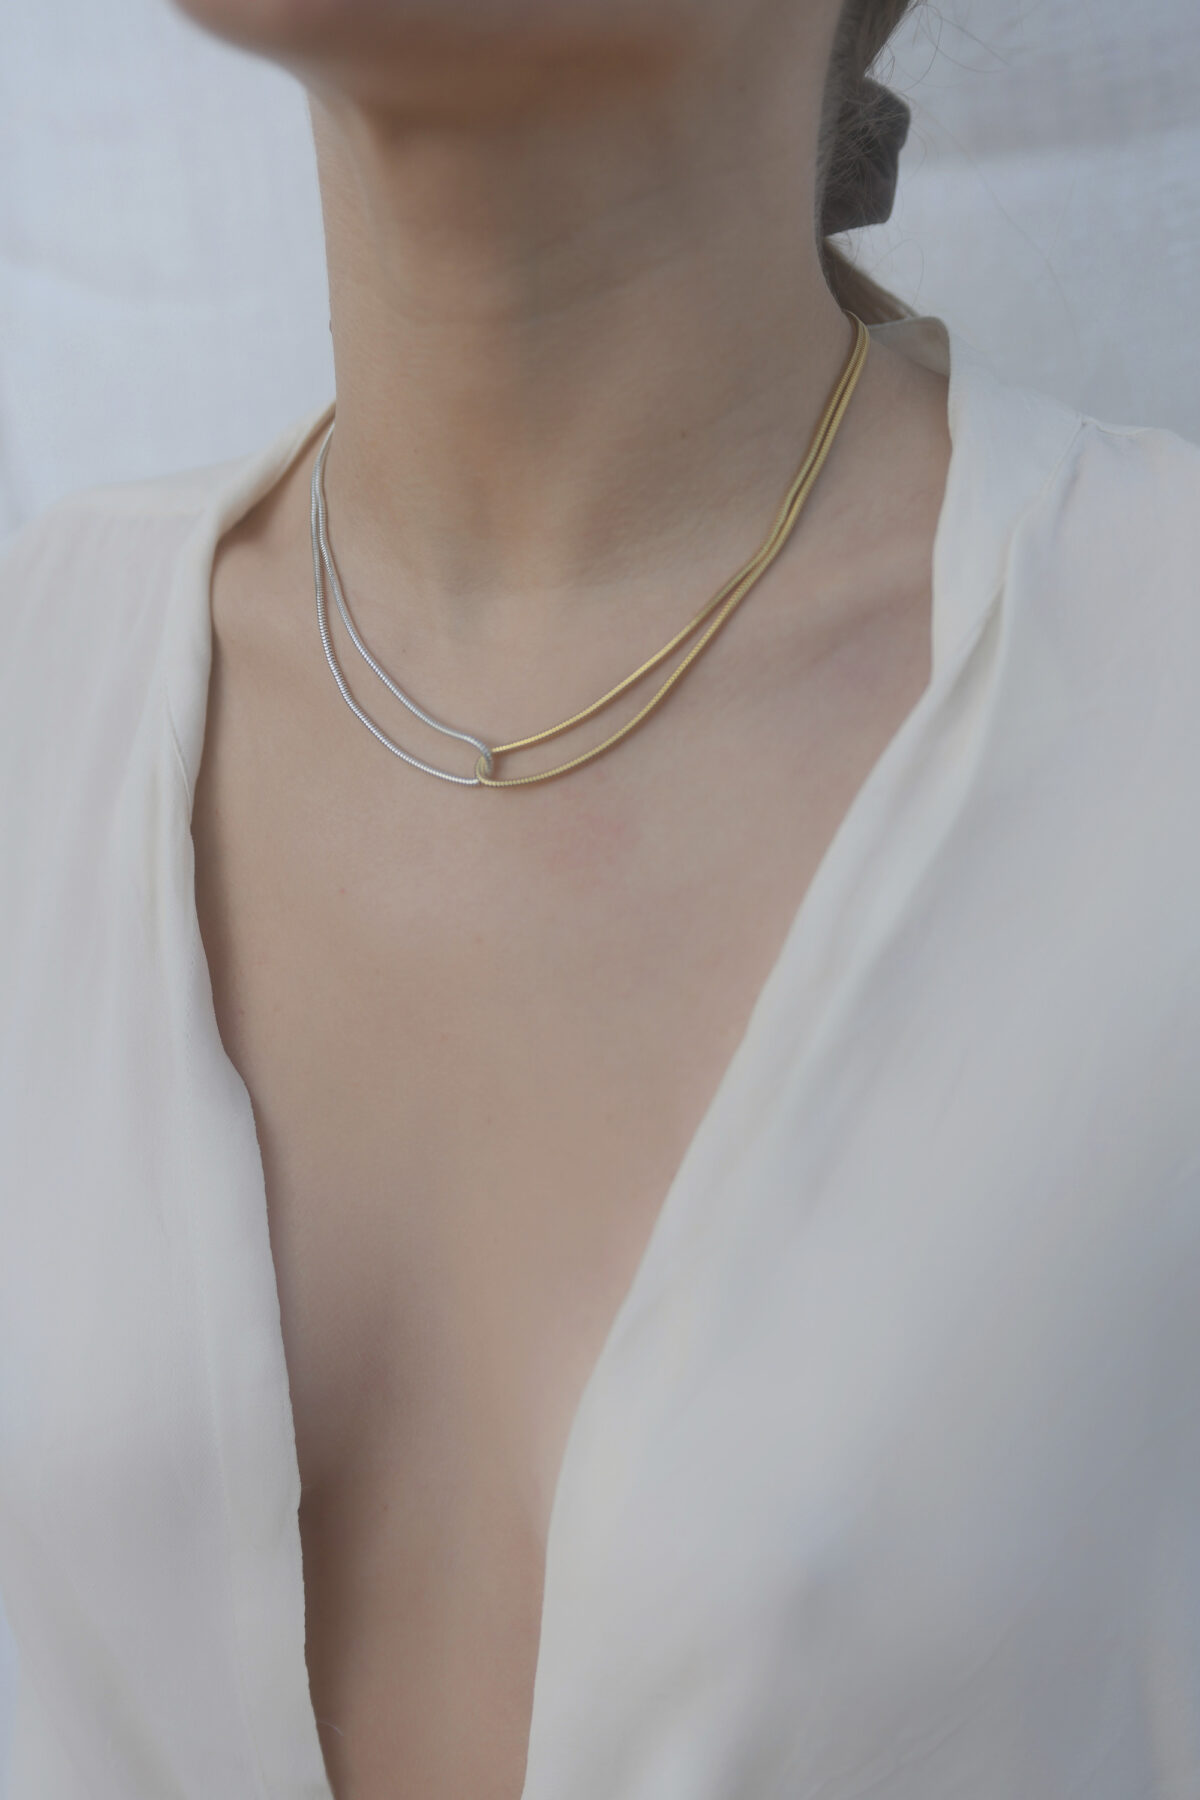 GL201_MIXED-METALS-necklace-gold-silver-maggoosh-matchbxoathens